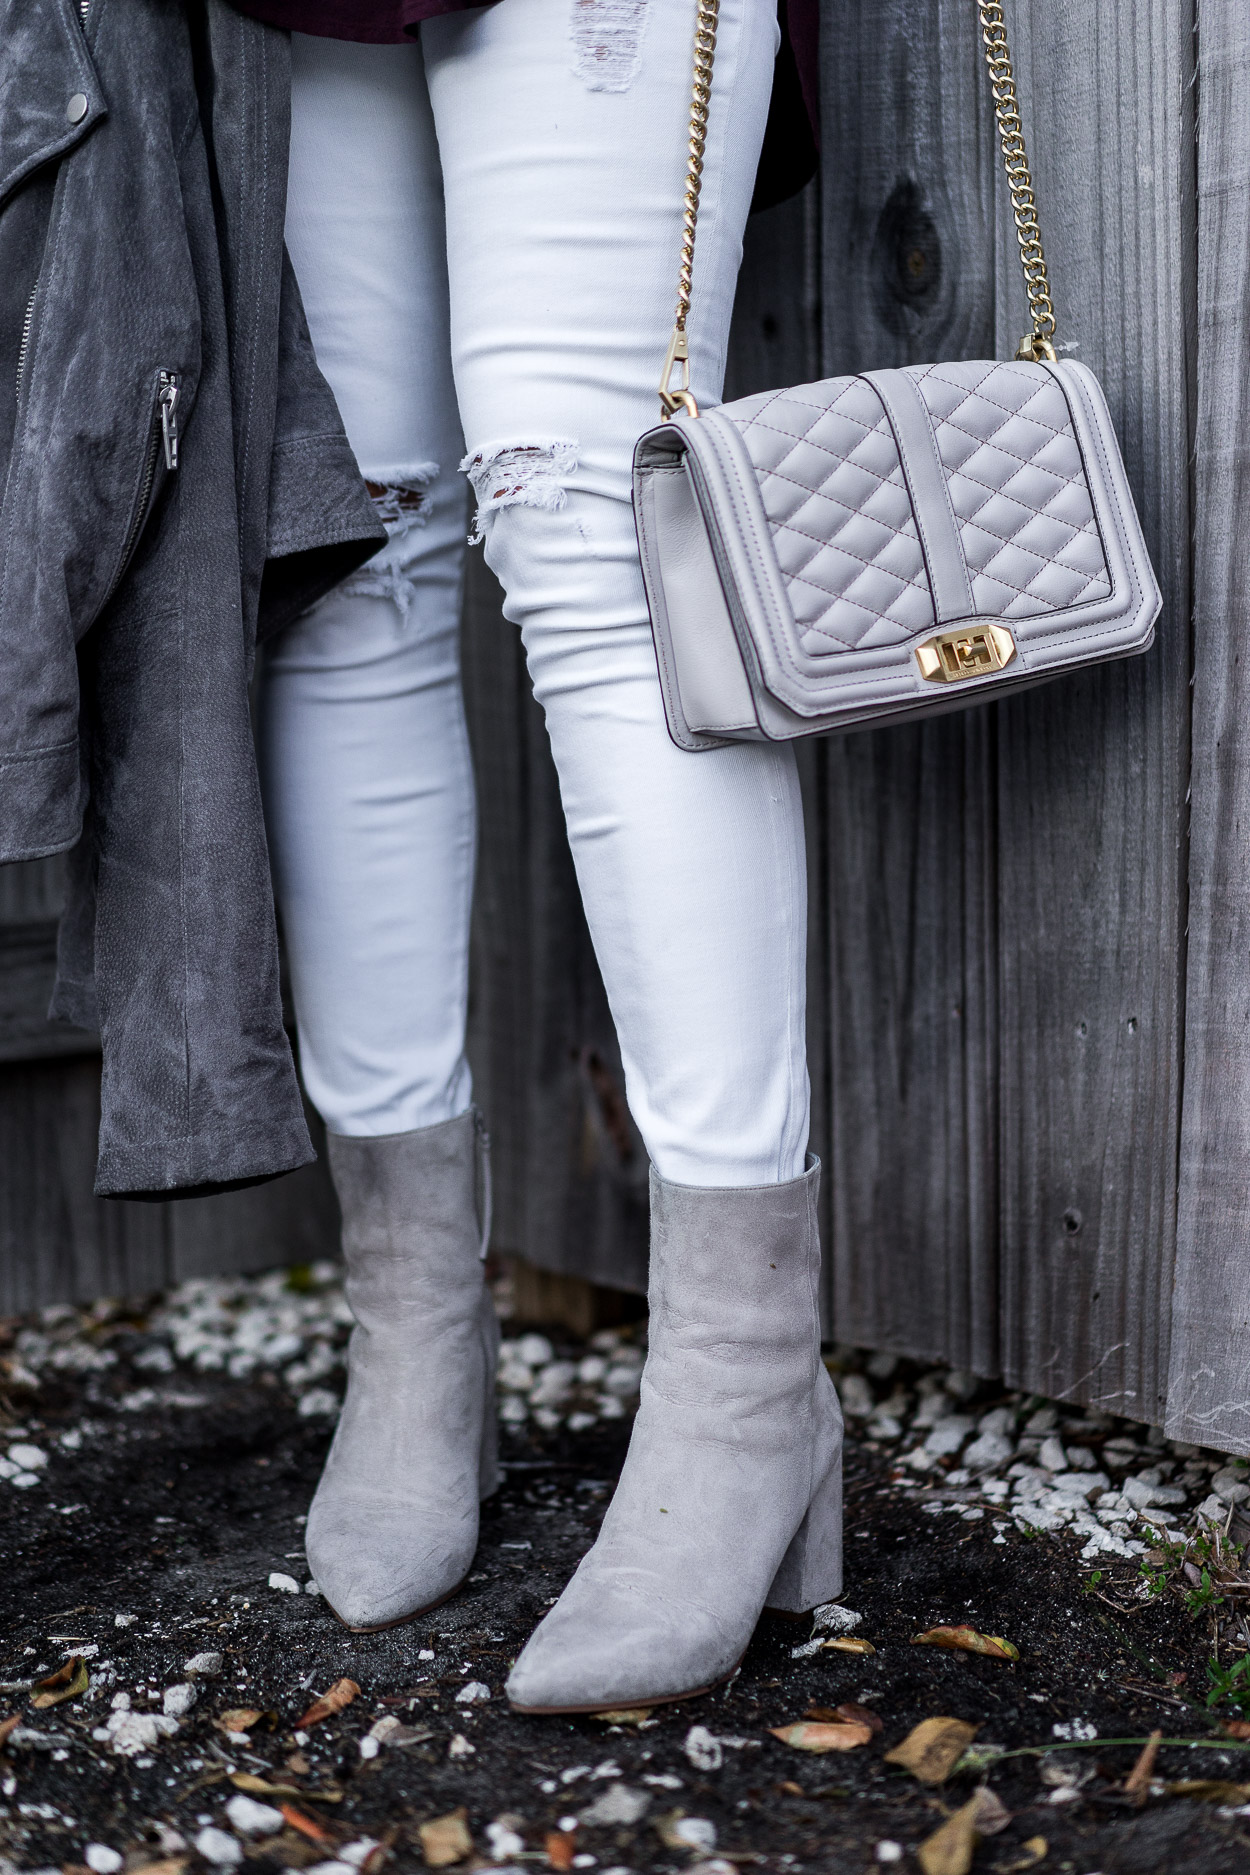 Casual Fall outfit is finished with Rebecca Minkoff Love Crossbody and Linea Paolo grey ankle booties